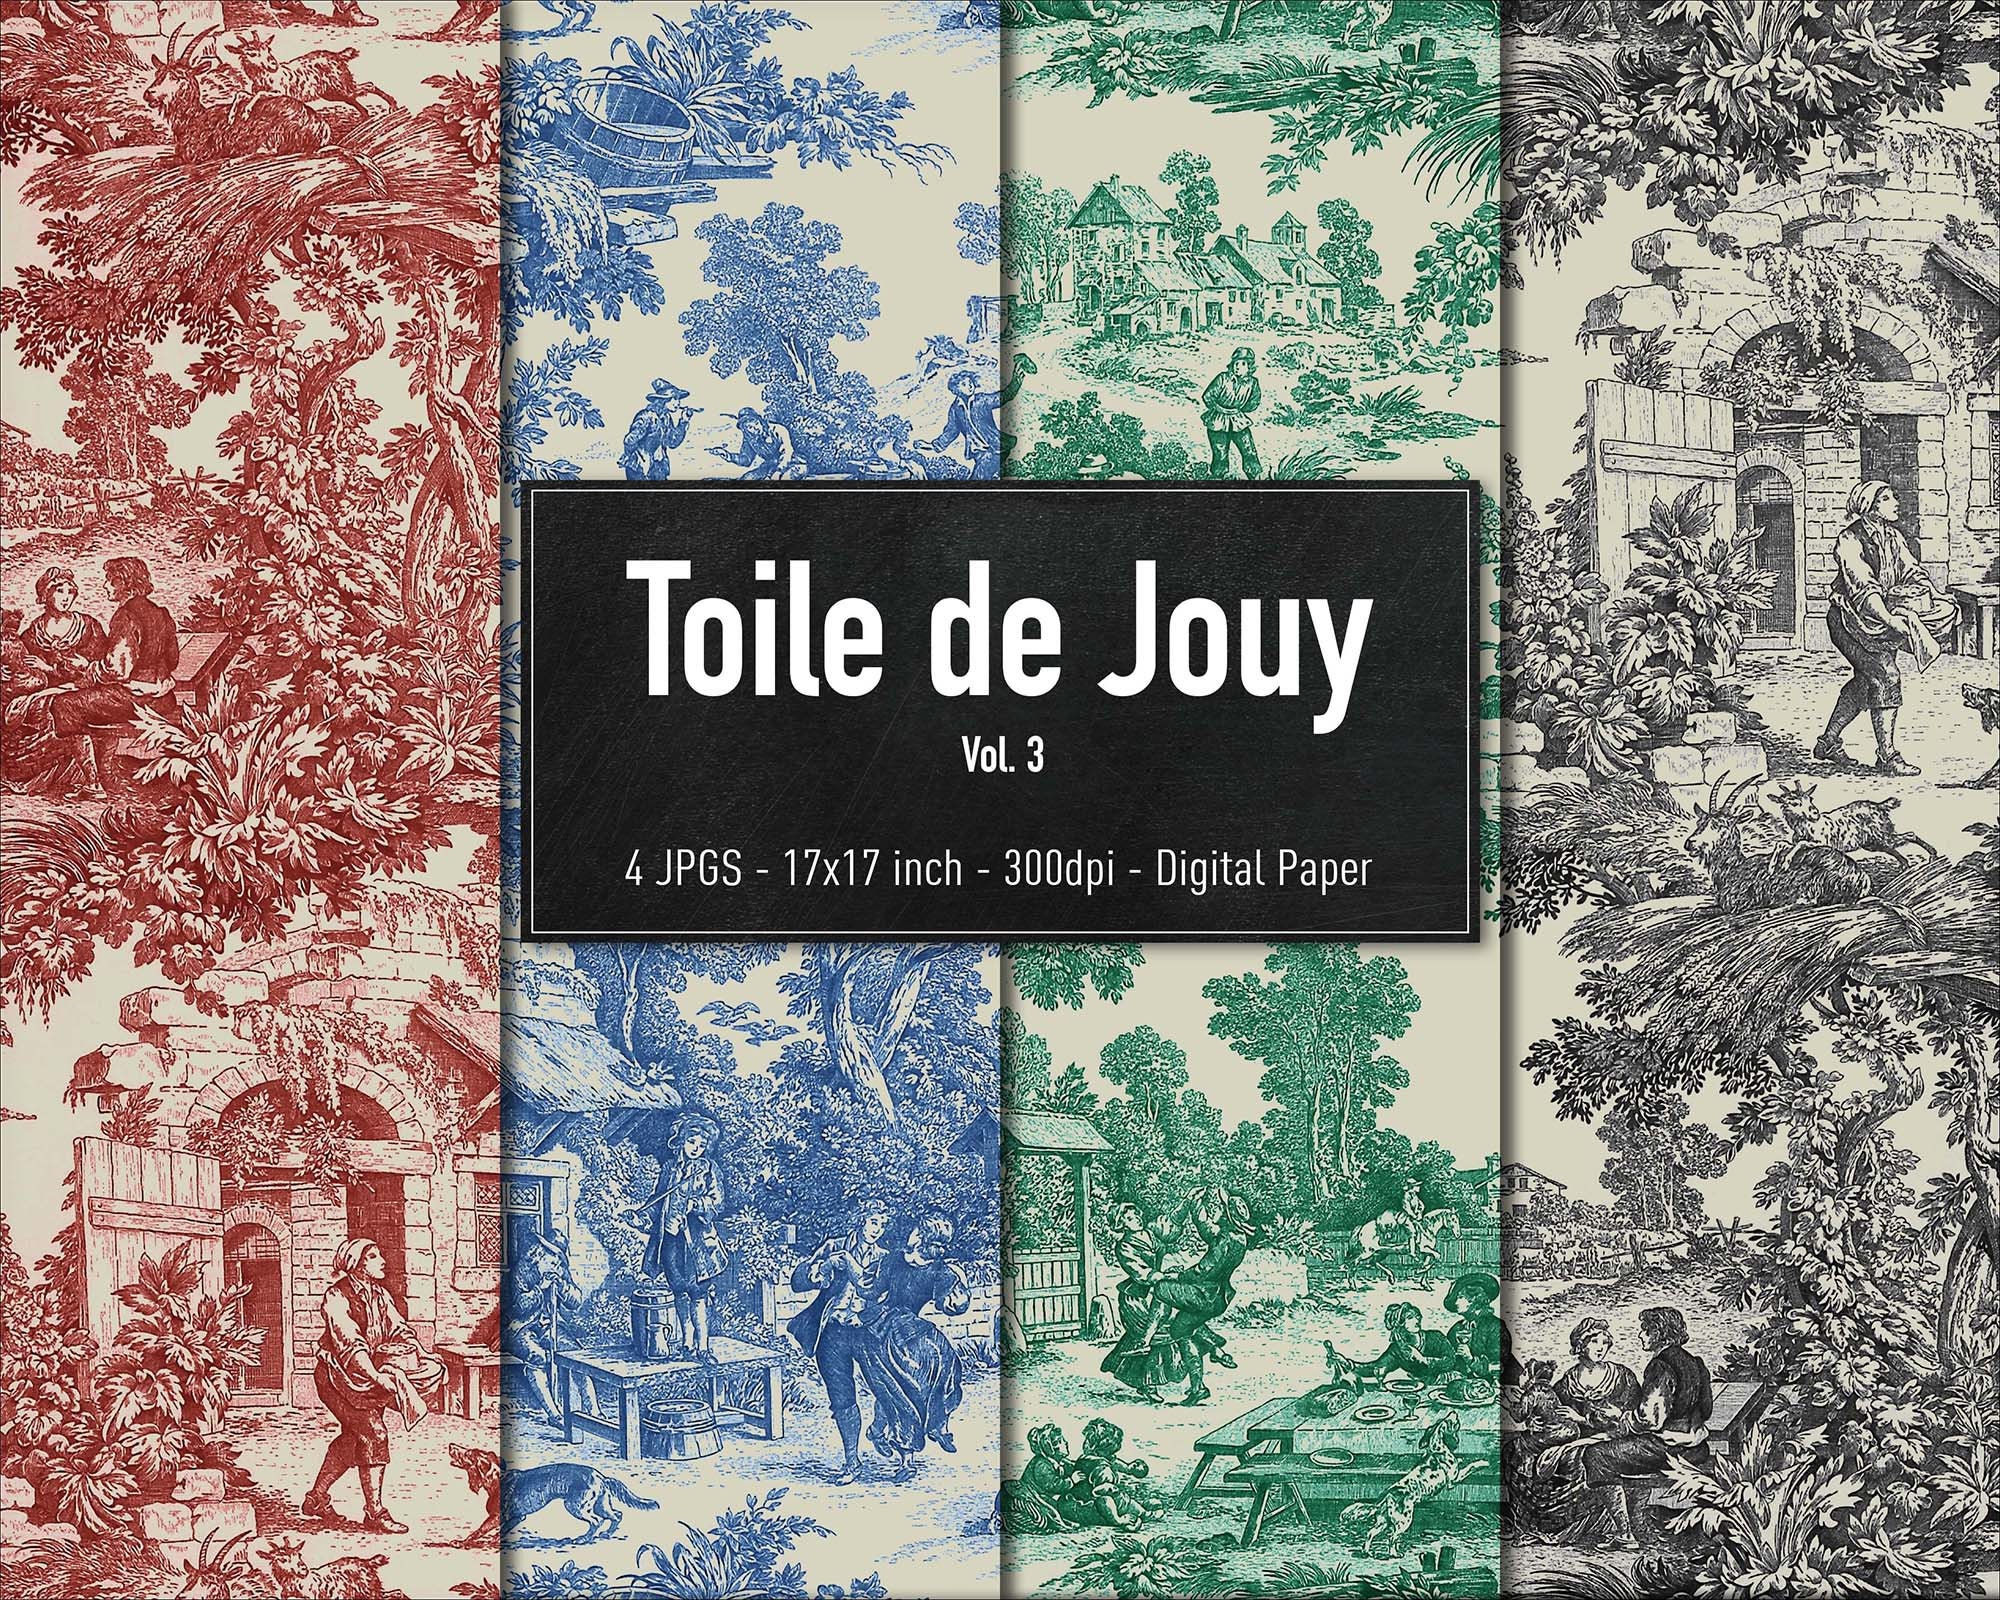 Made in France: La Toile de Jouy - France Today